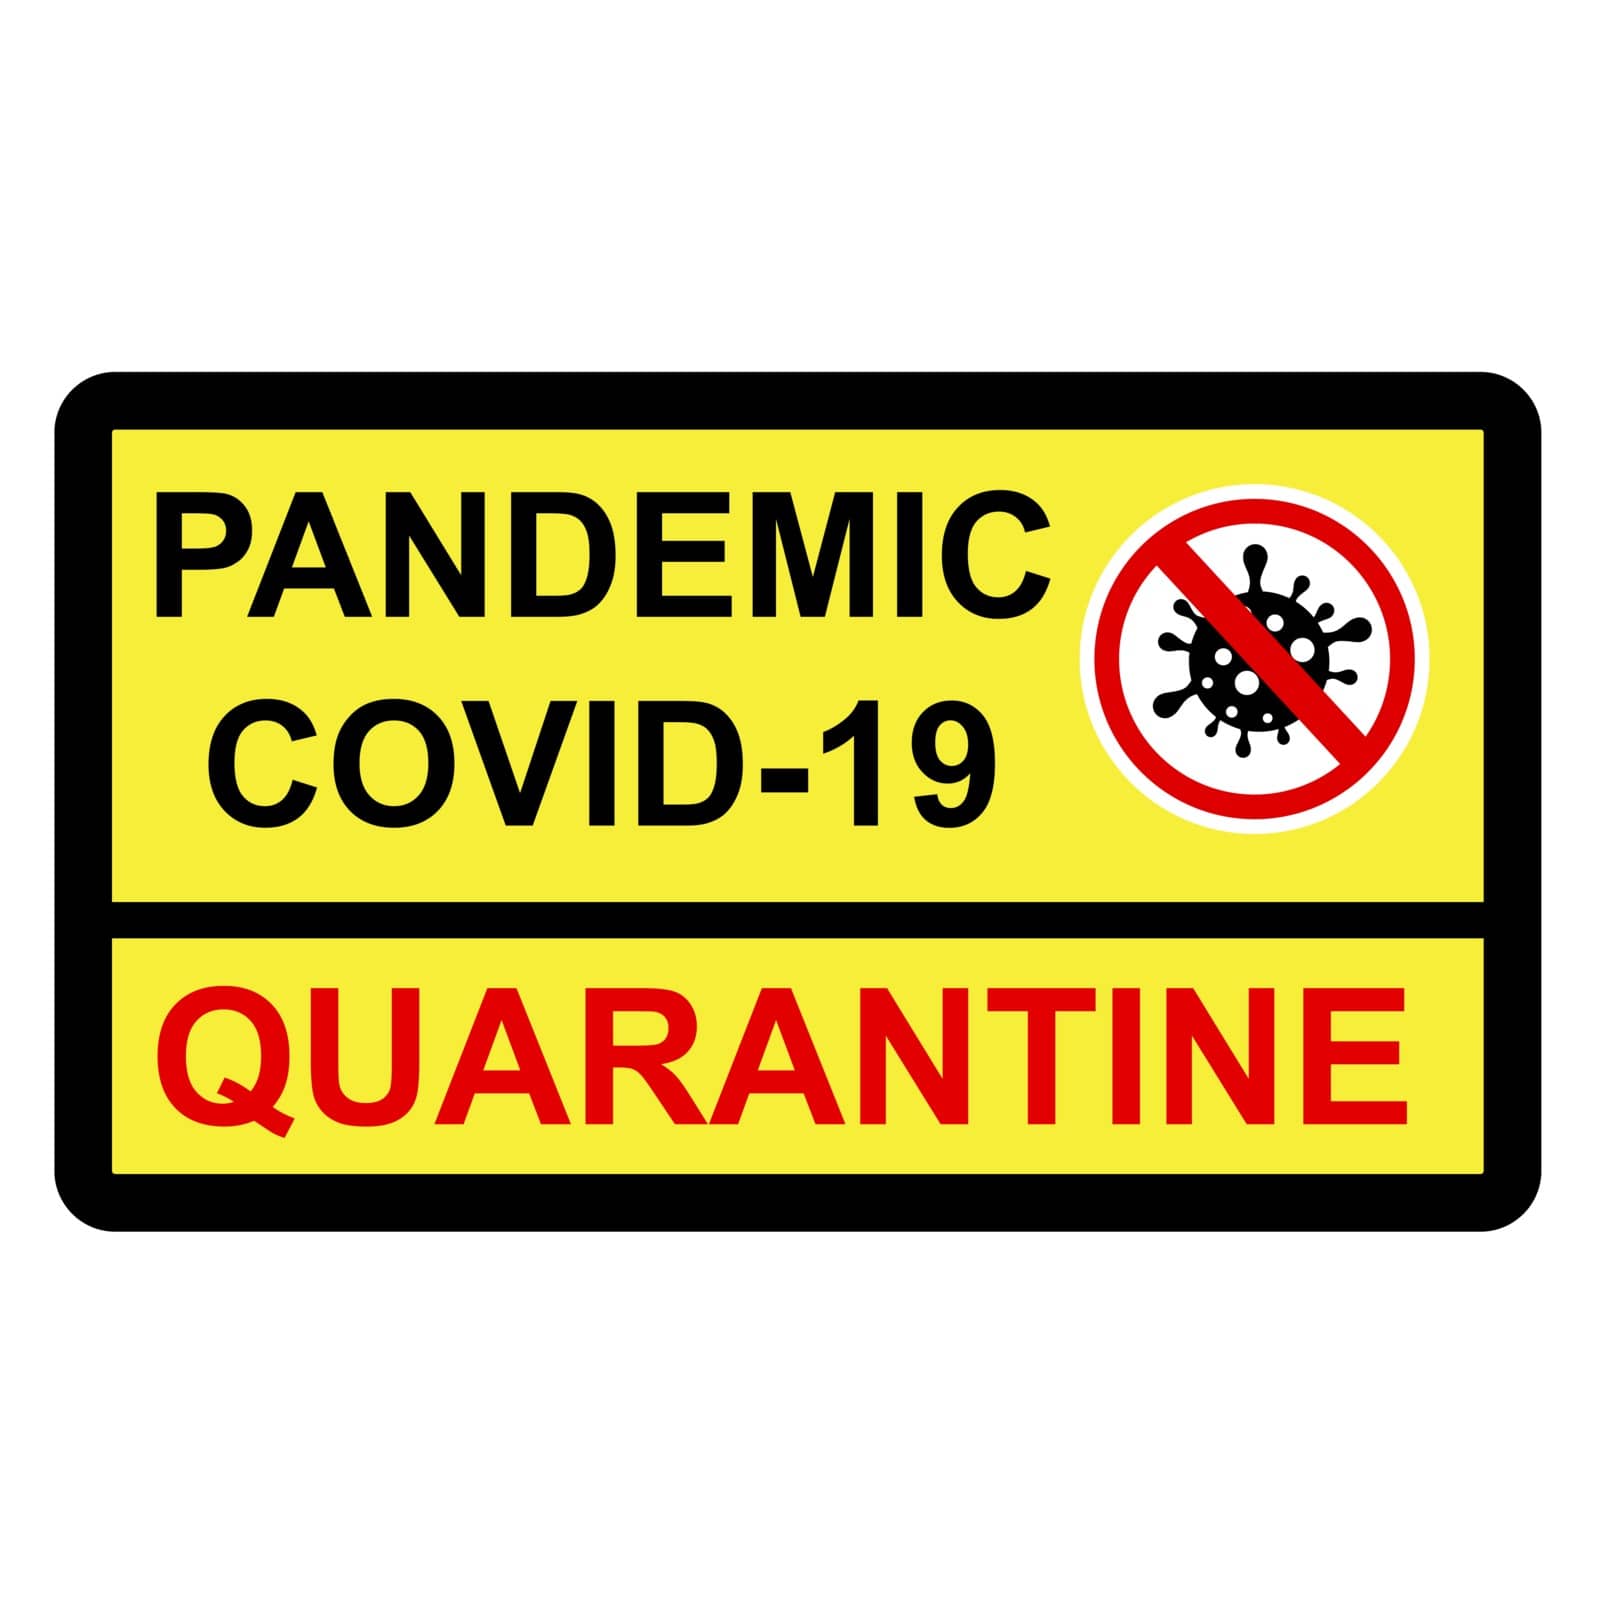 Simple Cutting Sticker, Vector Sign Caution Warning, Quarantine Outbreak Alert from Covid-19 by om_yos